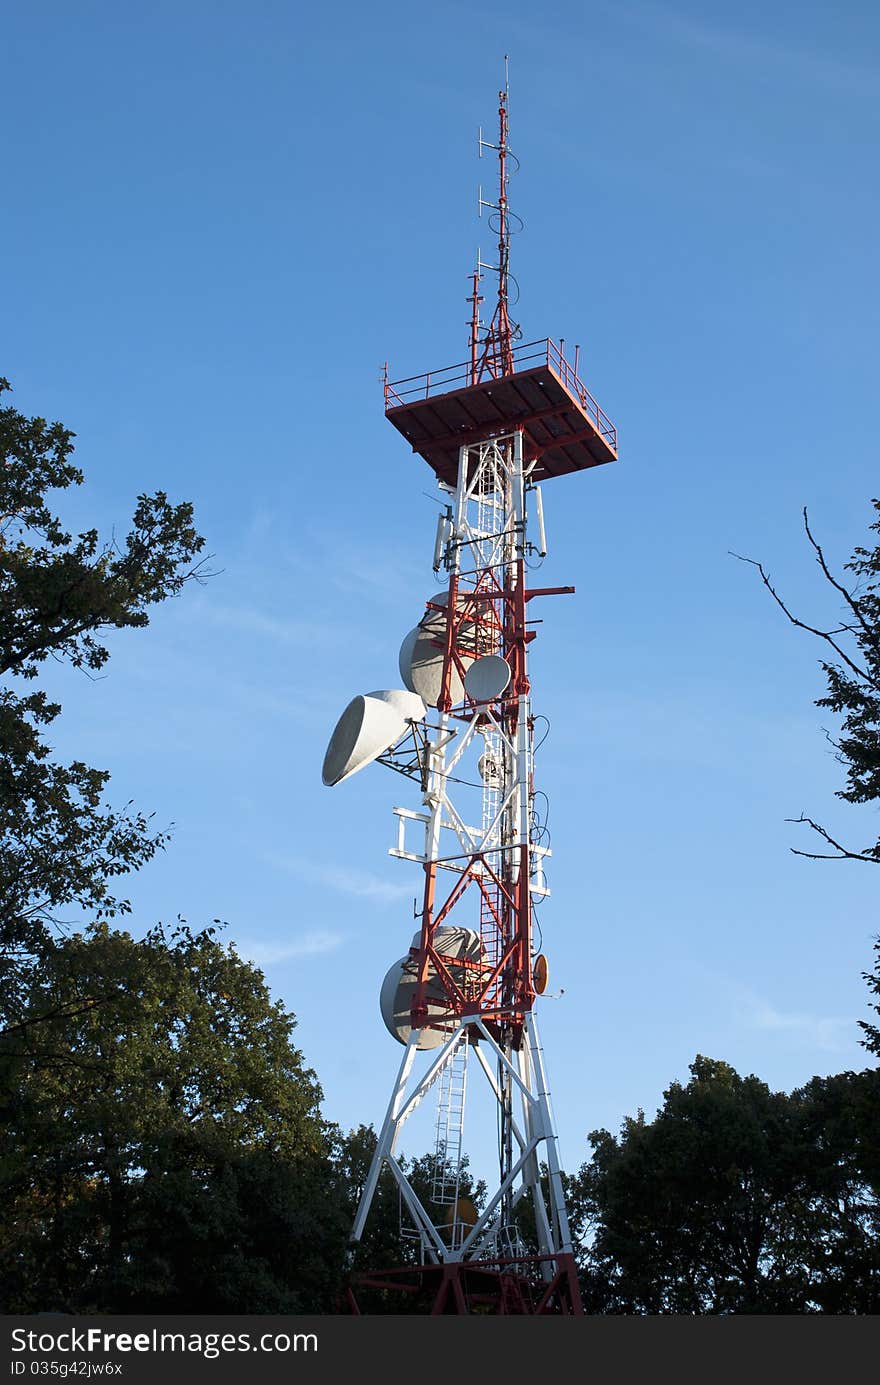 Huge communication antenna surrounded by trees. Huge communication antenna surrounded by trees.